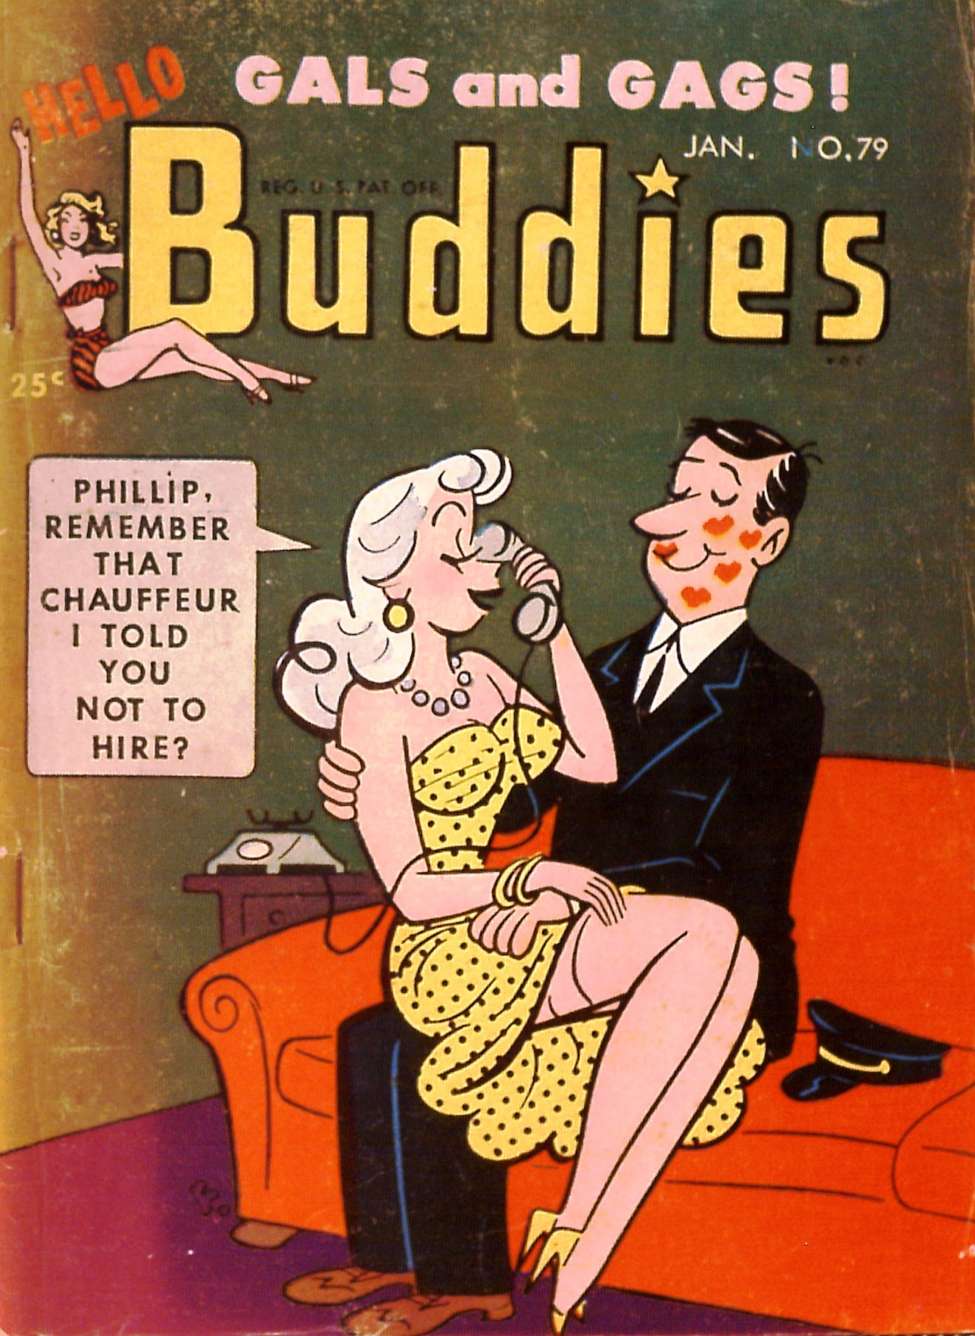 Book Cover For Hello Buddies 79